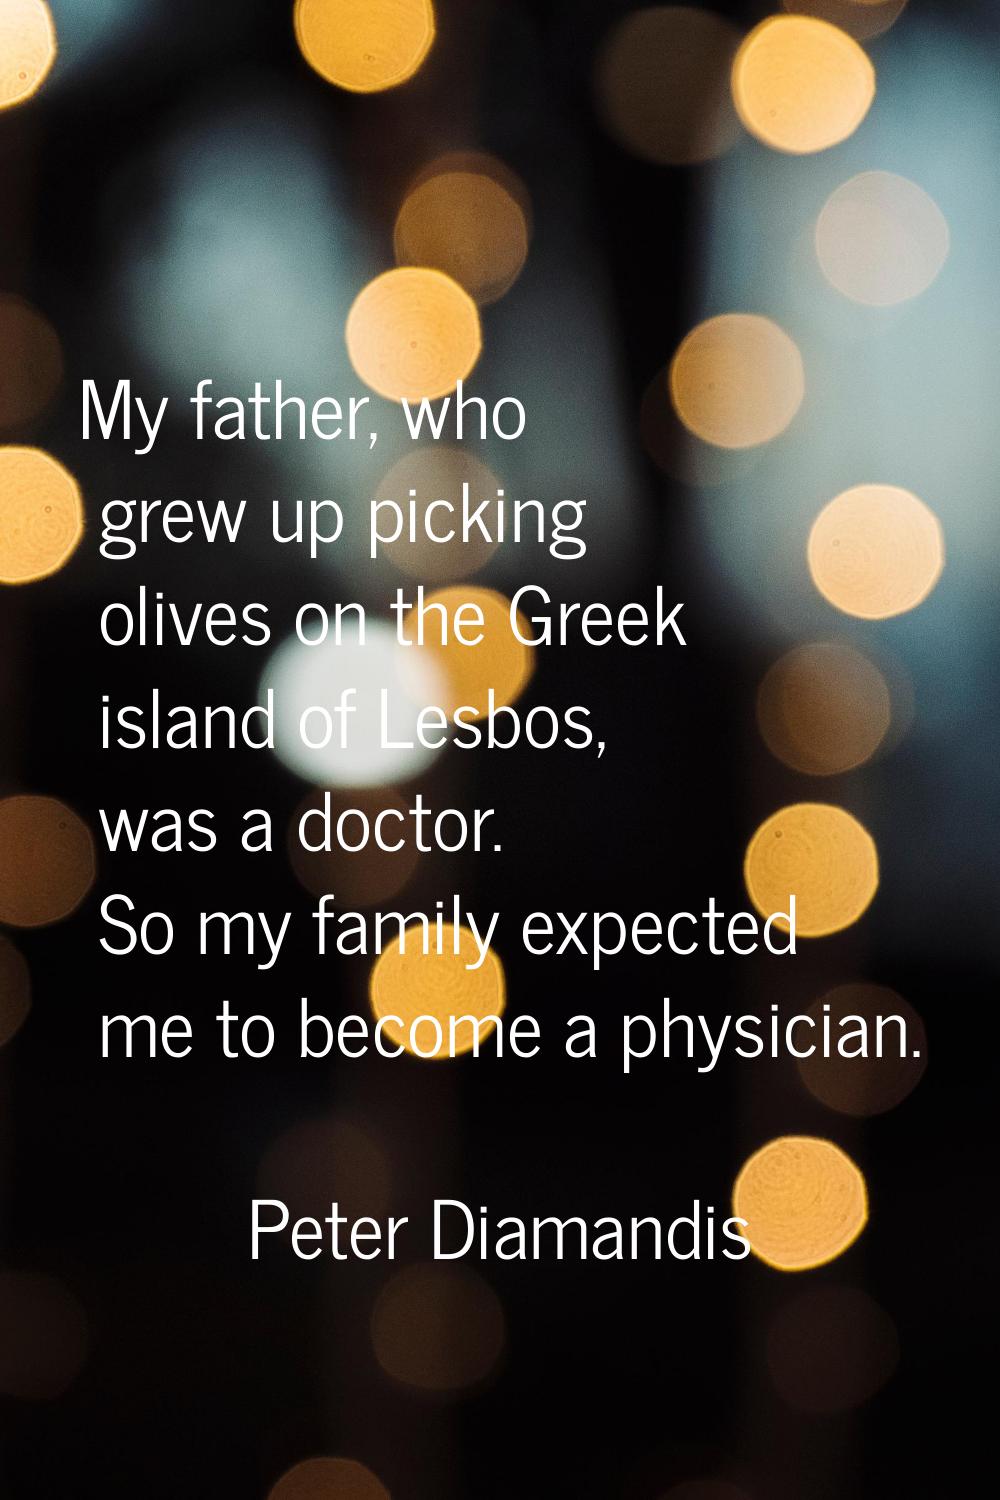 My father, who grew up picking olives on the Greek island of Lesbos, was a doctor. So my family exp